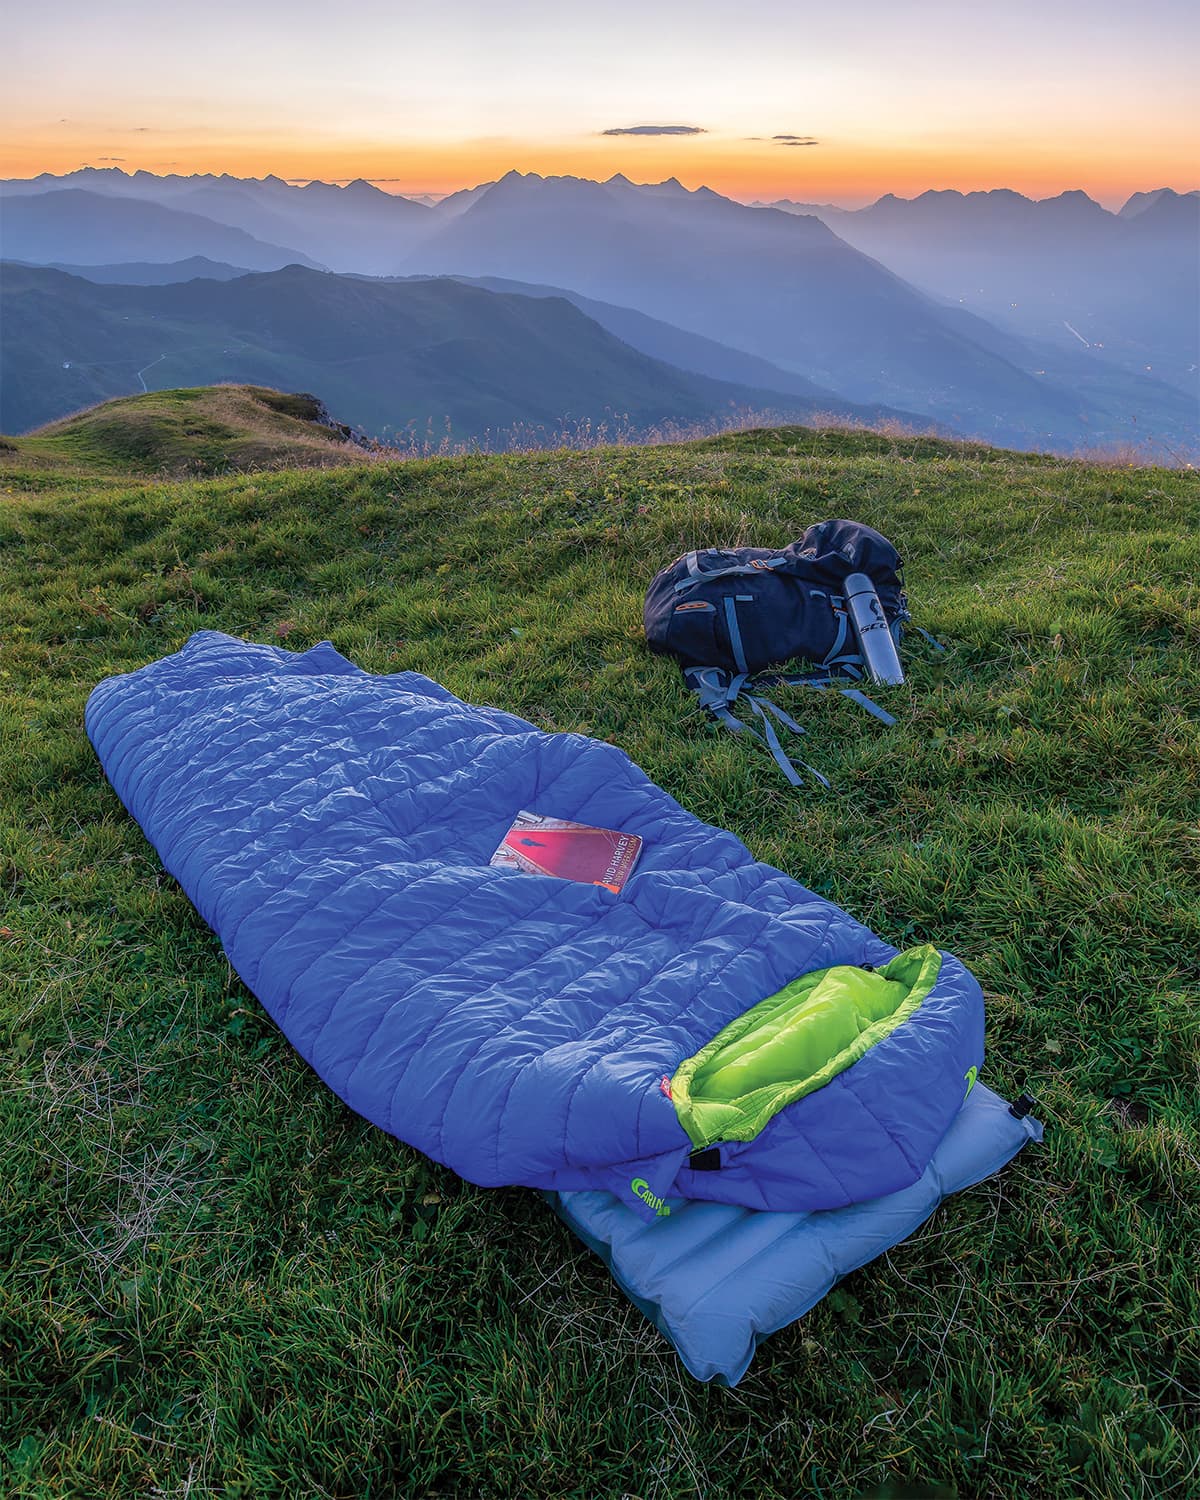 Sleeping bag with a view of the mountains